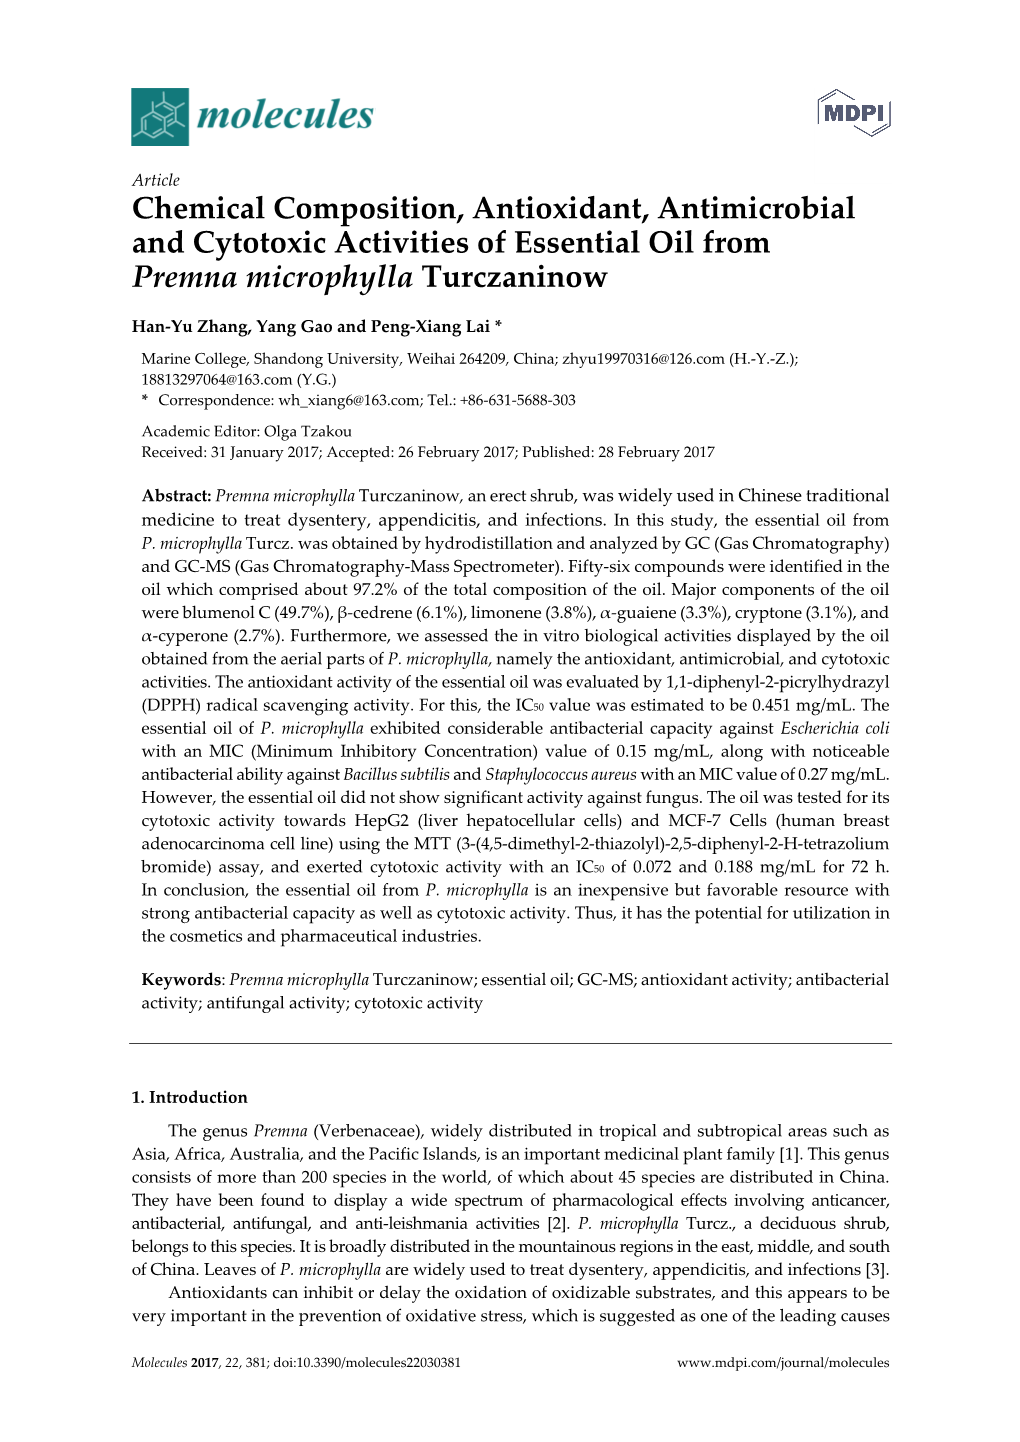 Chemical Composition, Antioxidant, Antimicrobial and Cytotoxic Activities of Essential Oil from Premna Microphylla Turczaninow